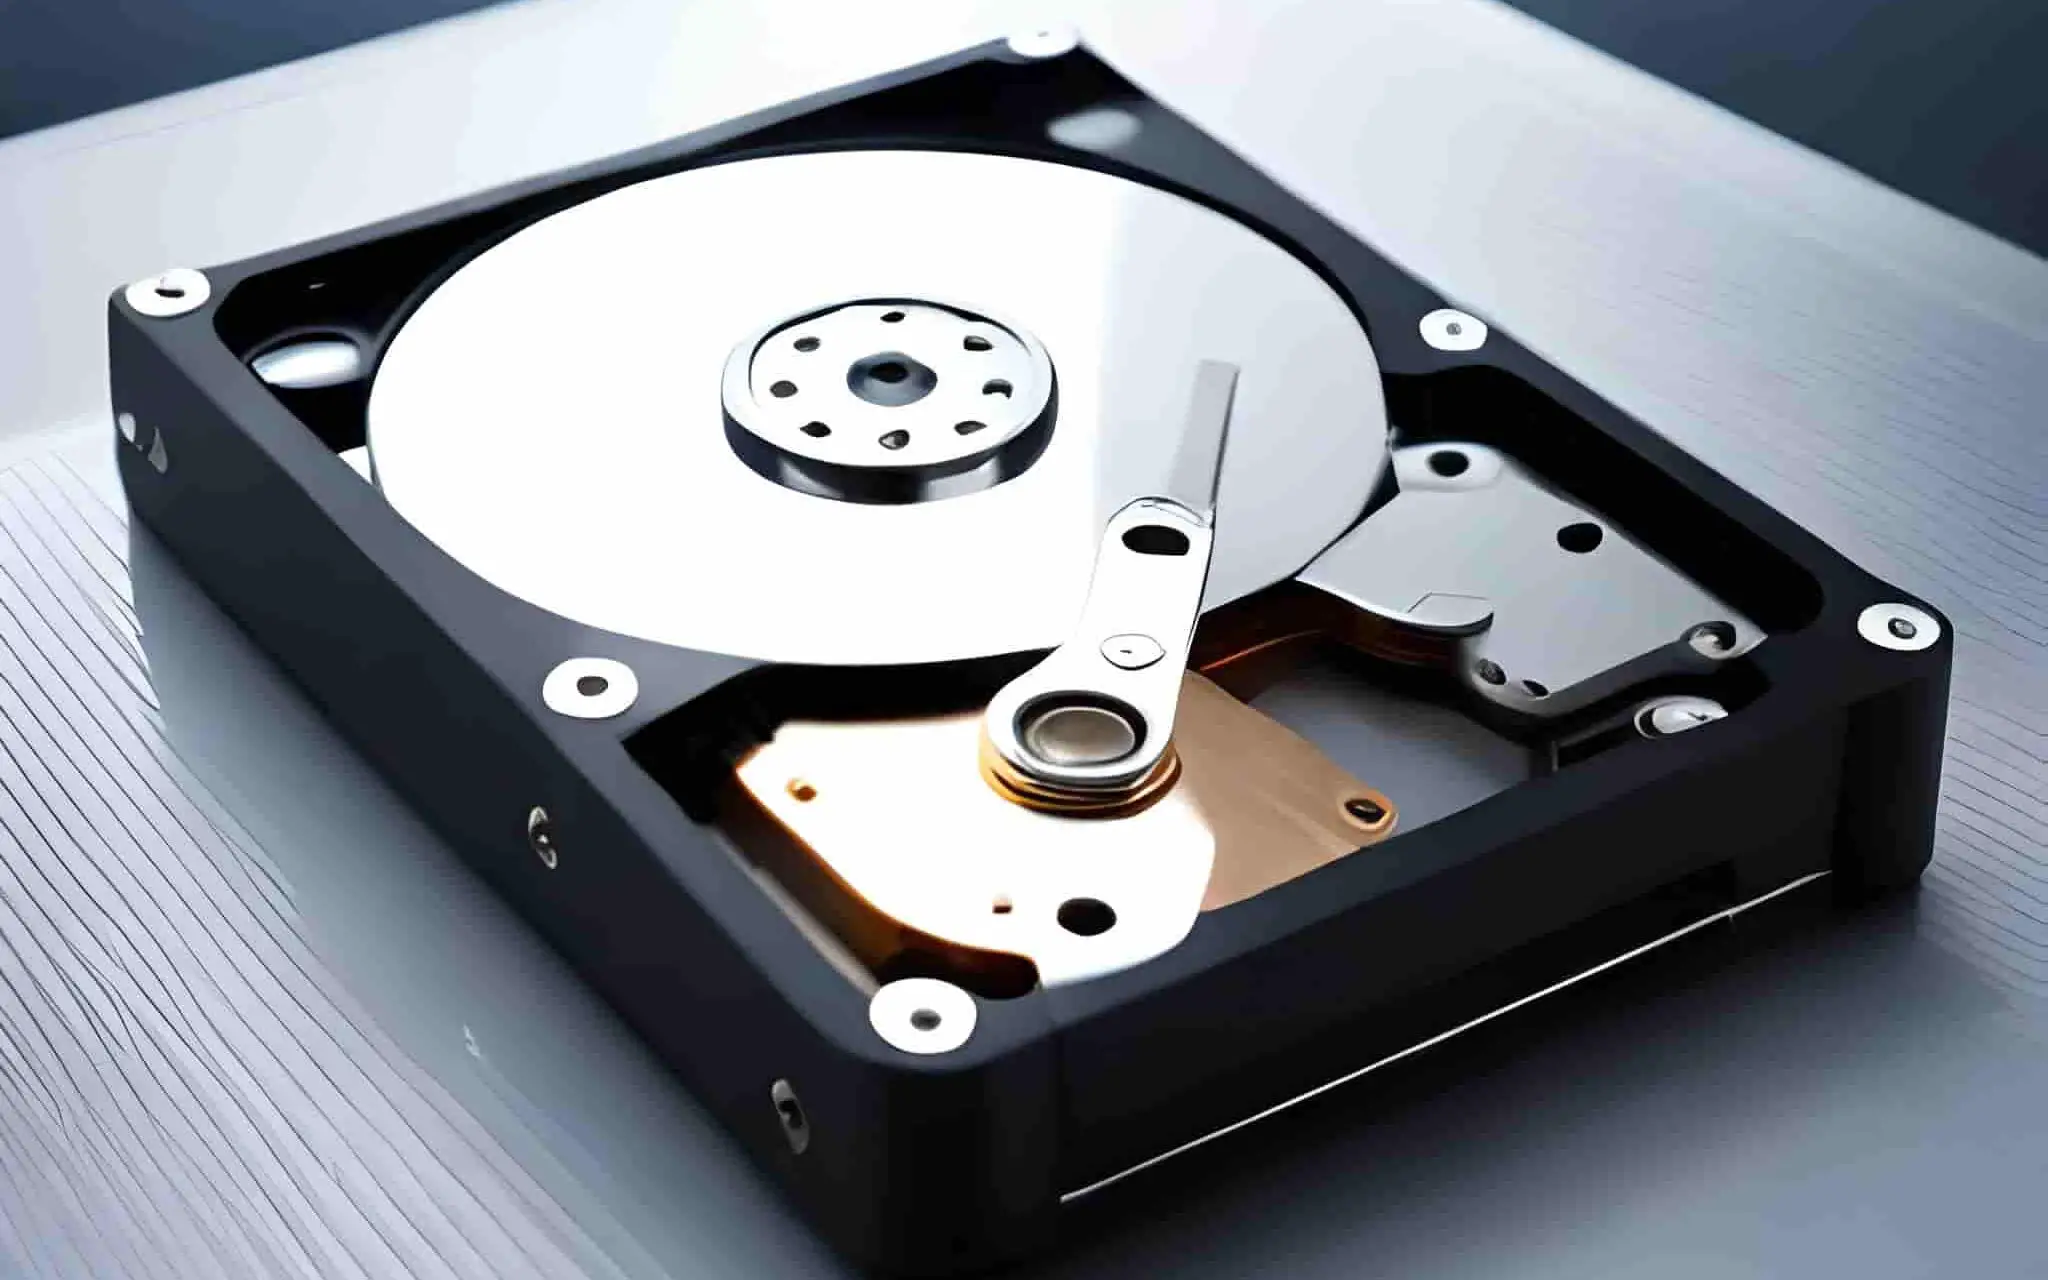 An image of a hard disk drive